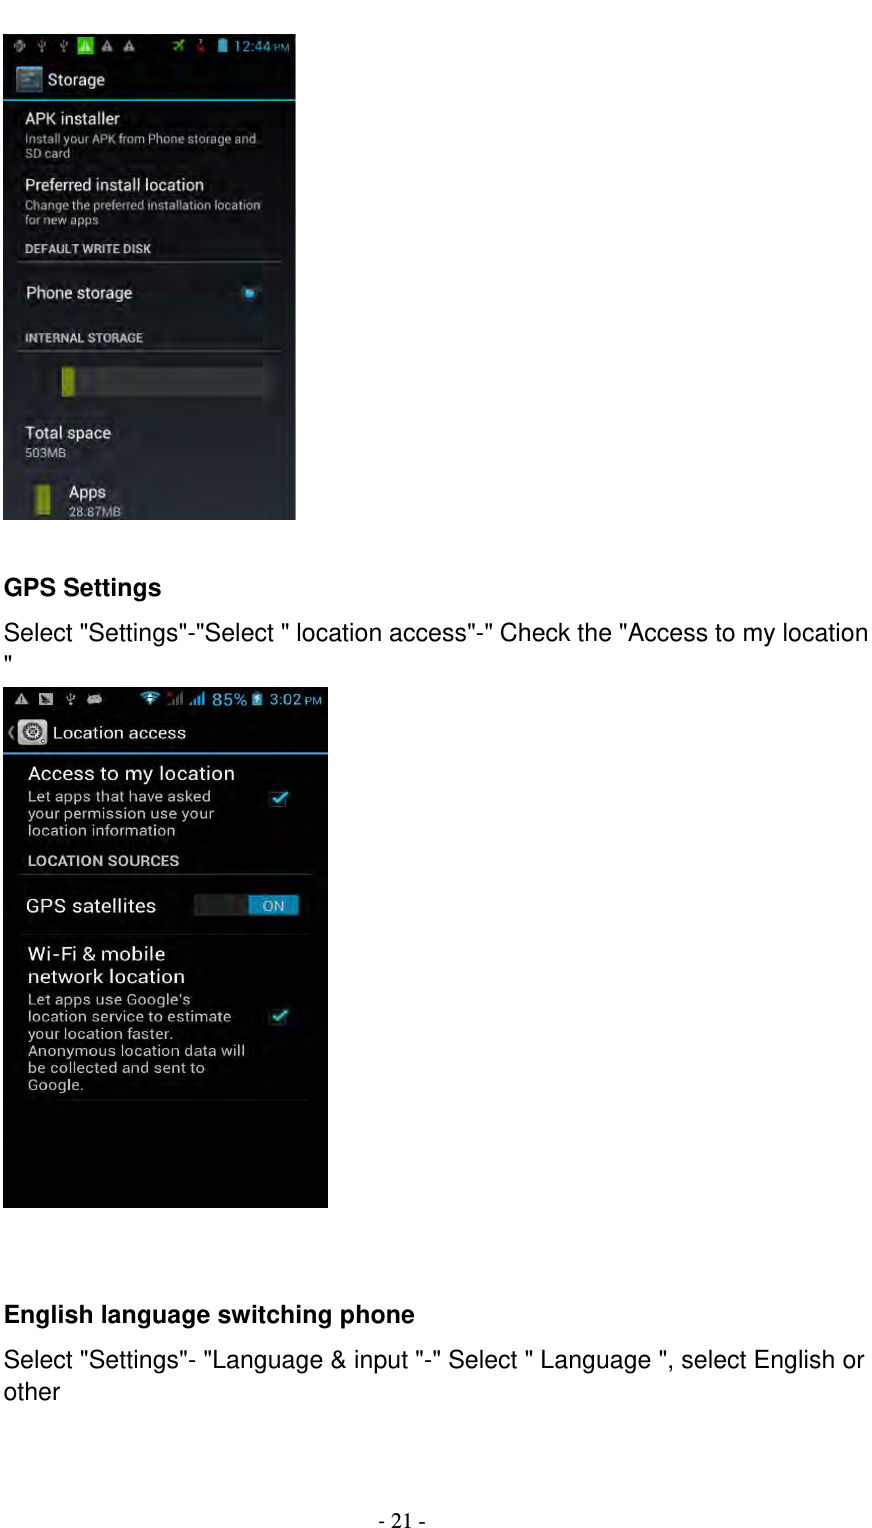                                          ‐ 21 -   GPS Settings Select &quot;Settings&quot;-&quot;Select &quot; location access&quot;-&quot; Check the &quot;Access to my location &quot;    English language switching phone Select &quot;Settings&quot;- &quot;Language &amp; input &quot;-&quot; Select &quot; Language &quot;, select English or other      